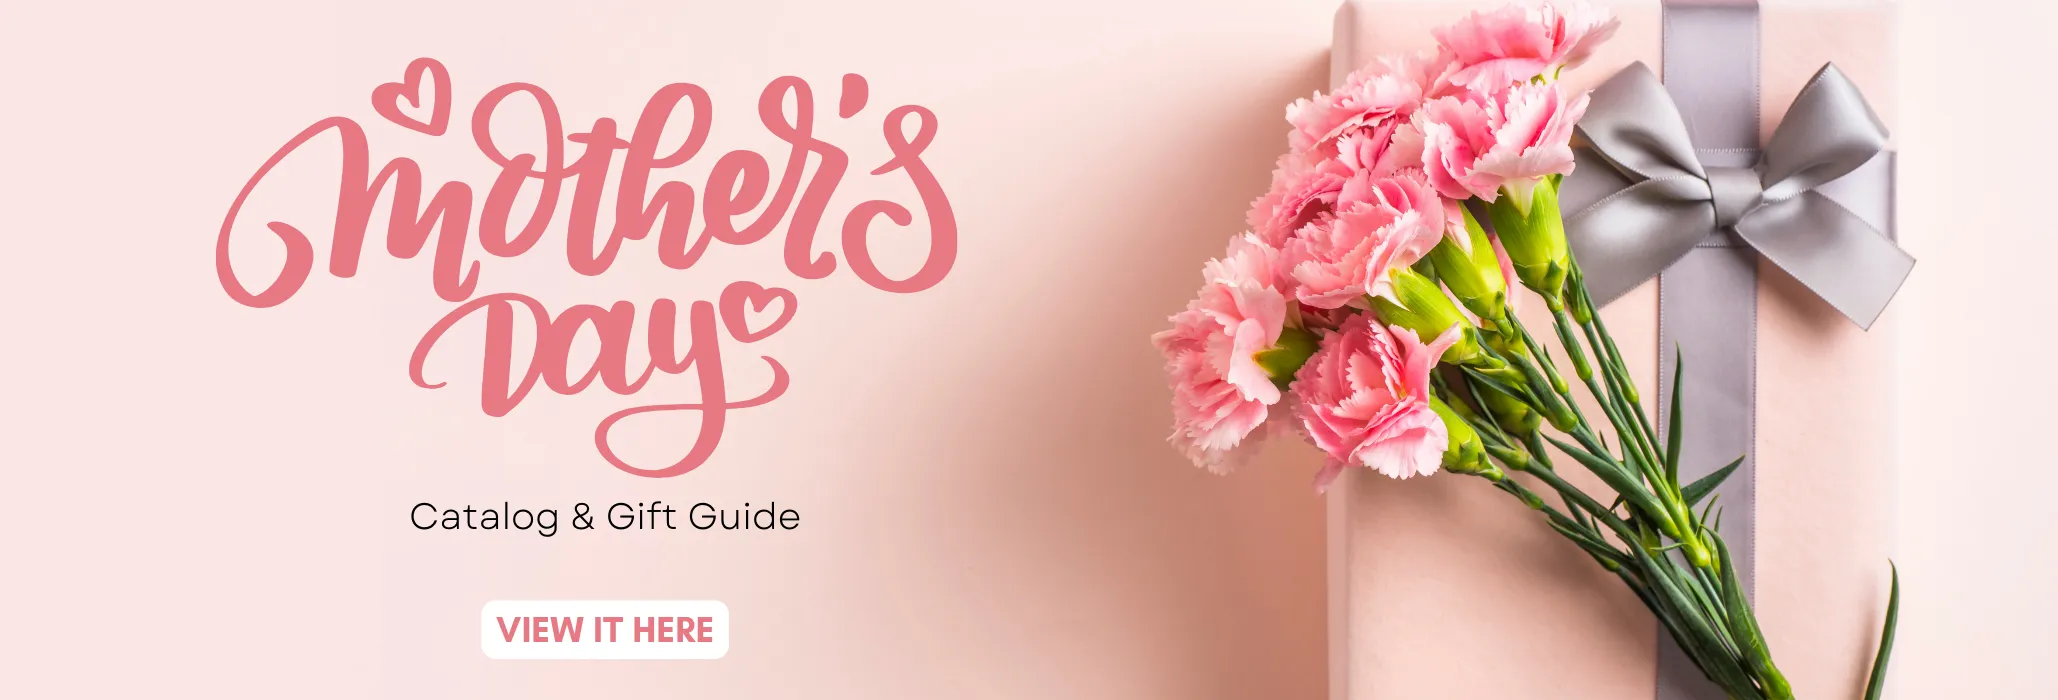 mother's day catalog and gift guide